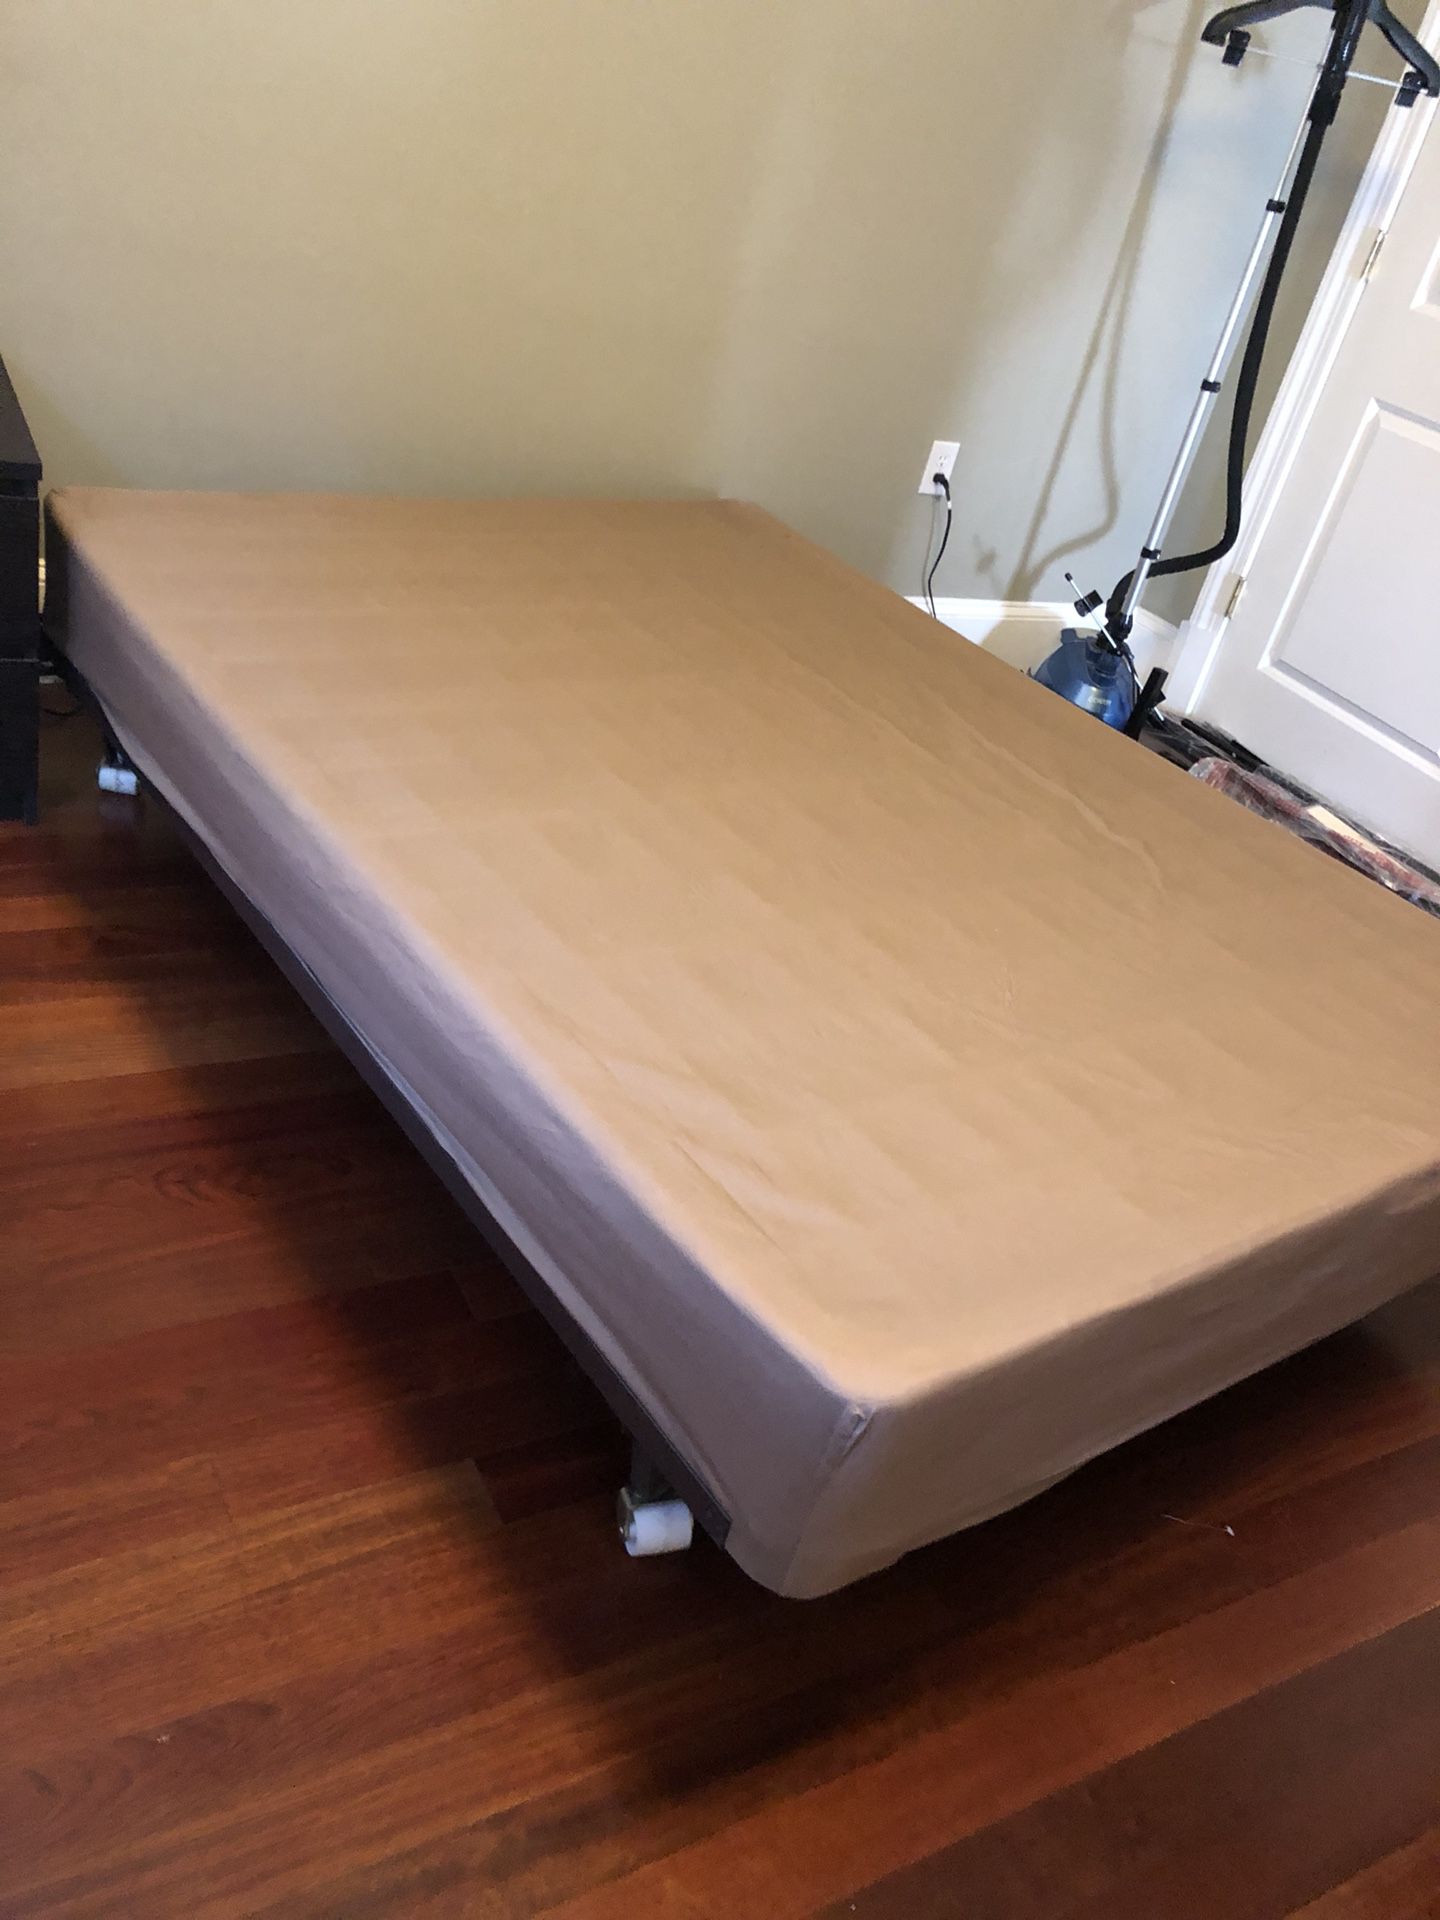 Full box spring and metal bed frame on wheels